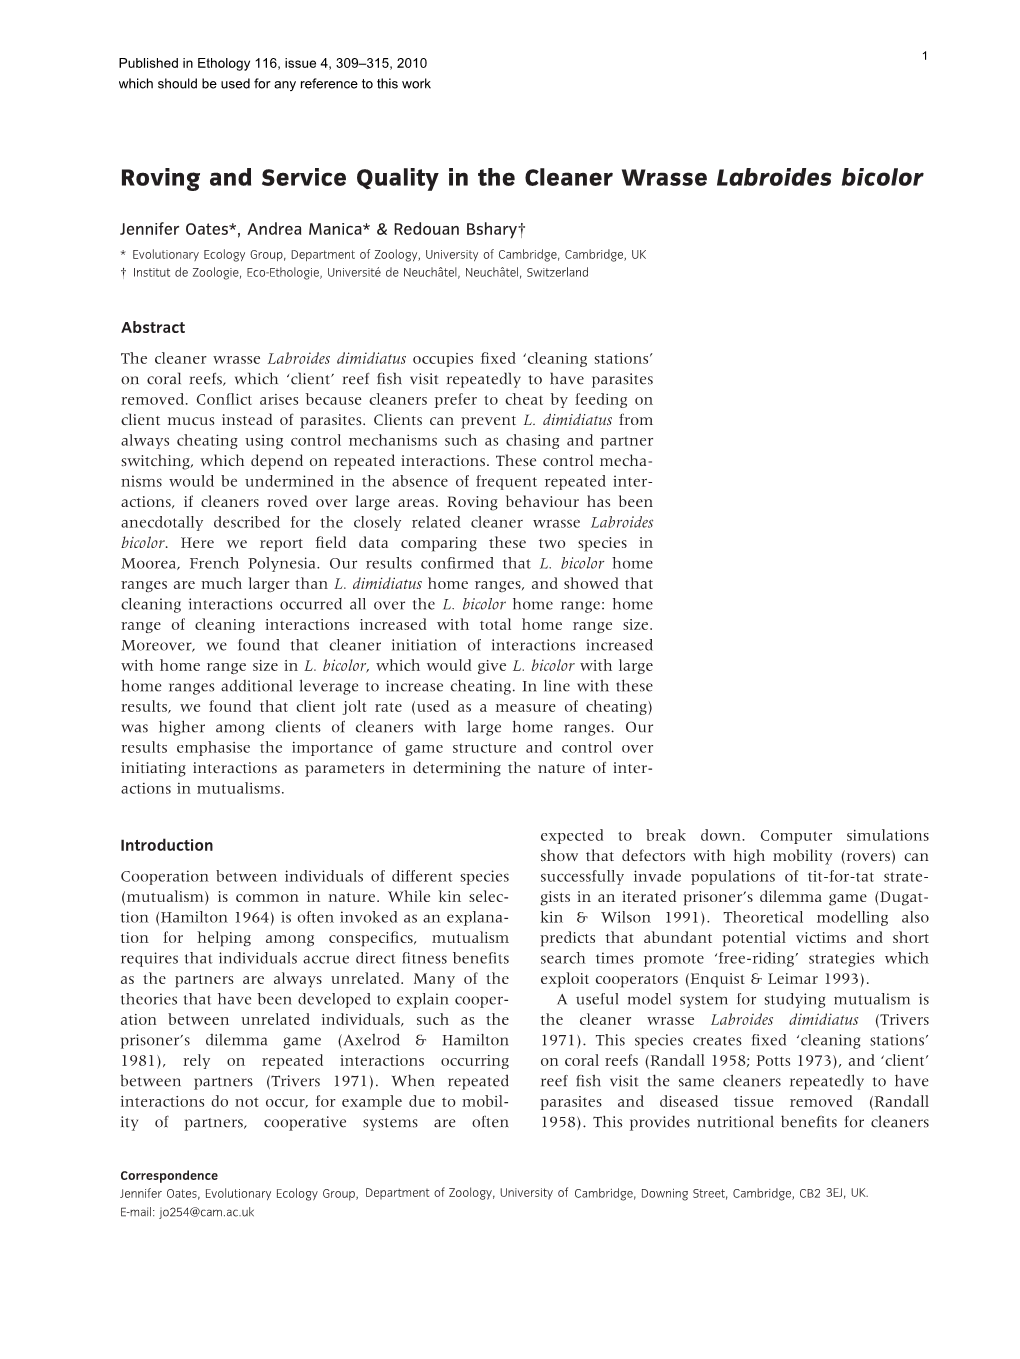 Roving and Service Quality in the Cleaner Wrasse Labroides Bicolor